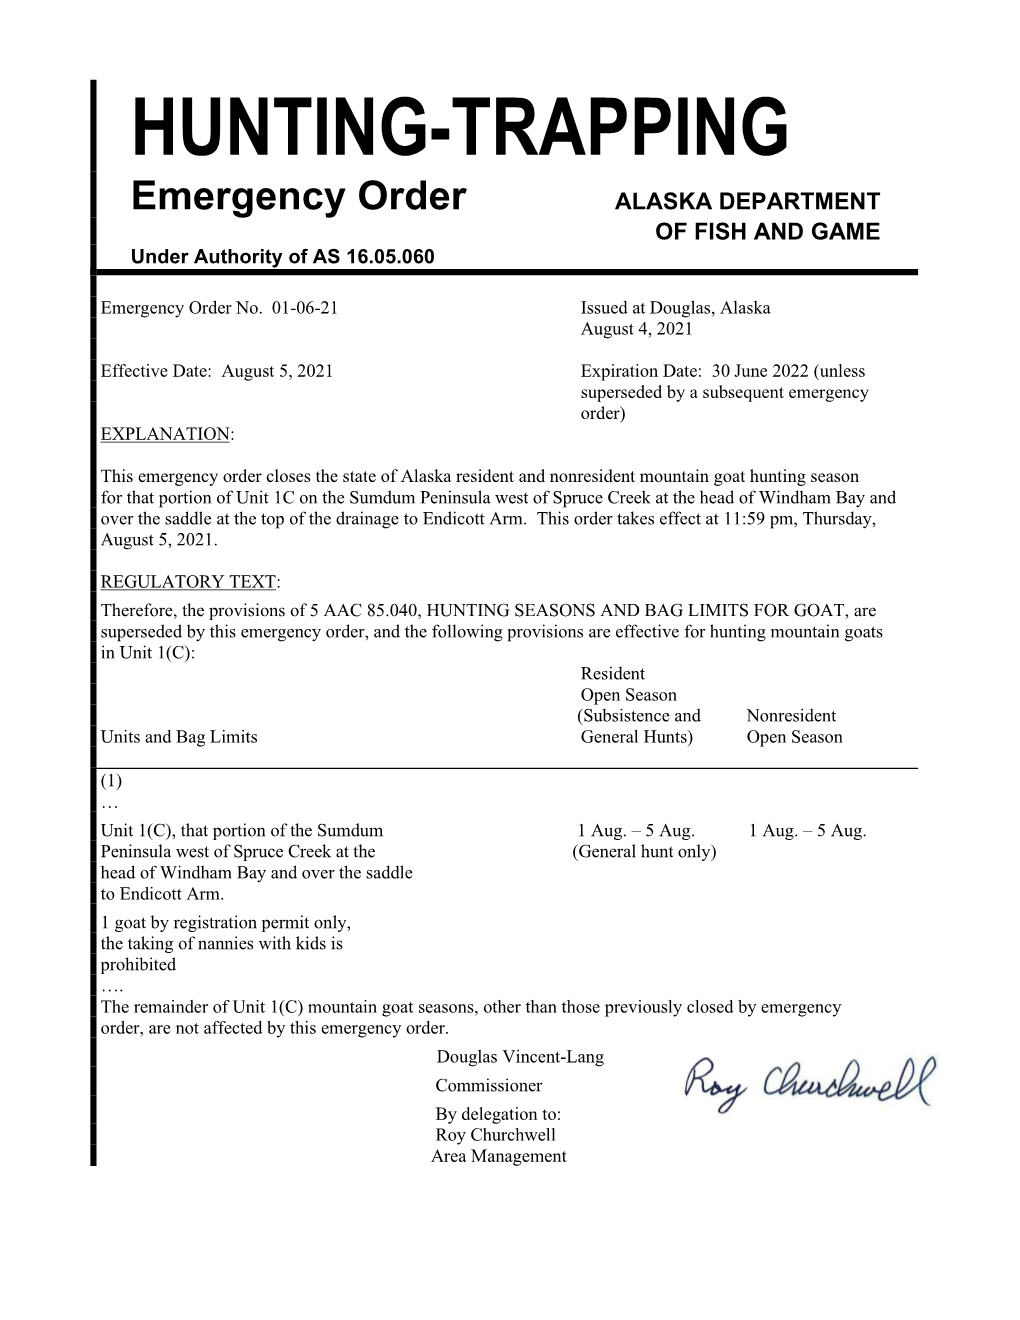 HUNTING-TRAPPING Emergency Order ALASKA DEPARTMENT of FISH and GAME Under Authority of AS 16.05.060